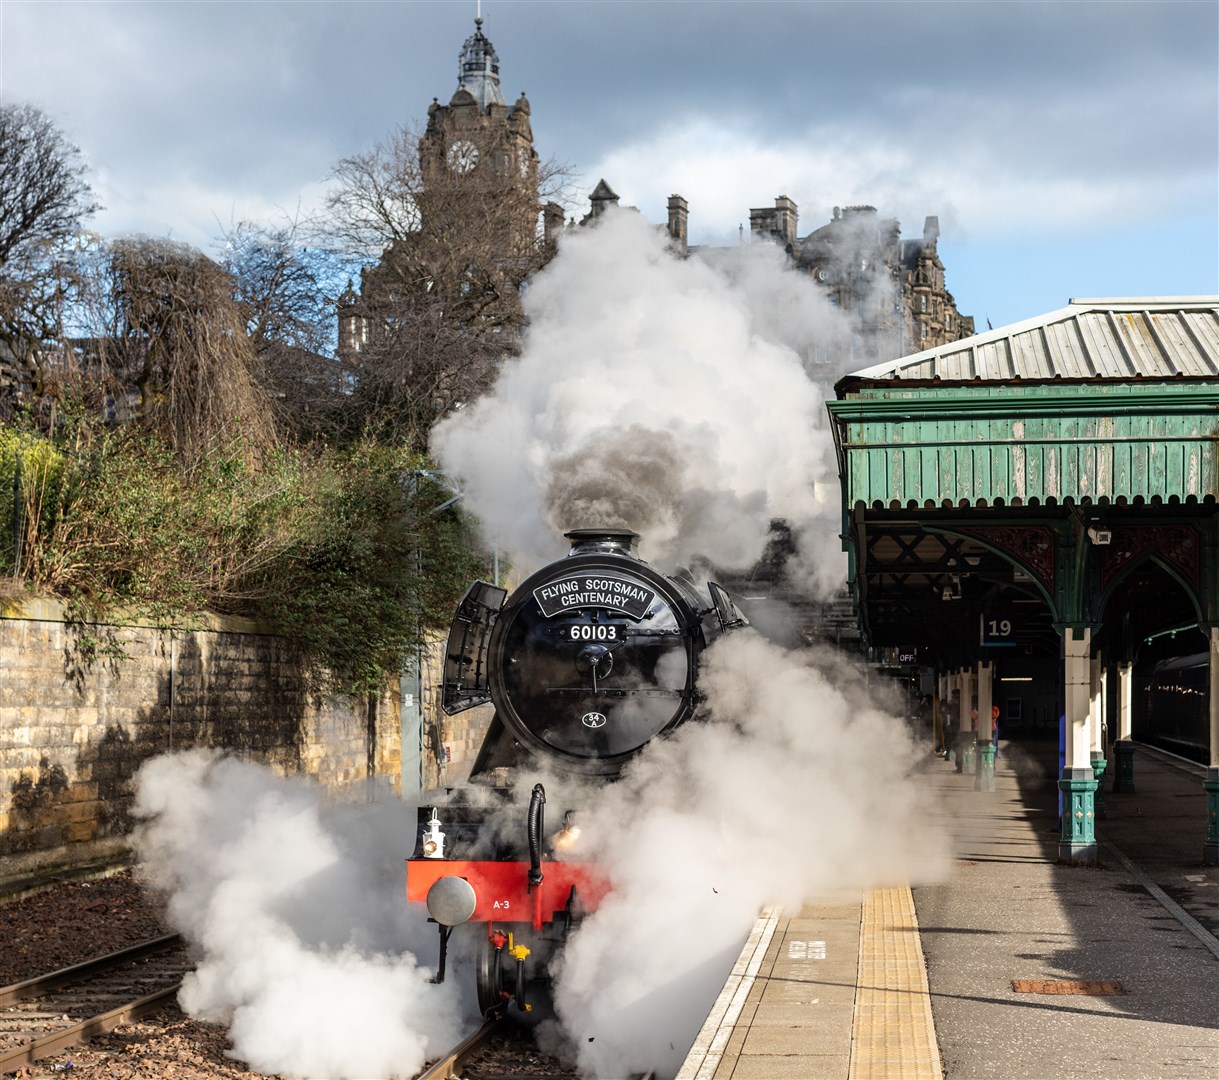 Flying Scotsman at Waverley Station Edinburgh for the Centenary Celebrations of the iconic steam locomotive.